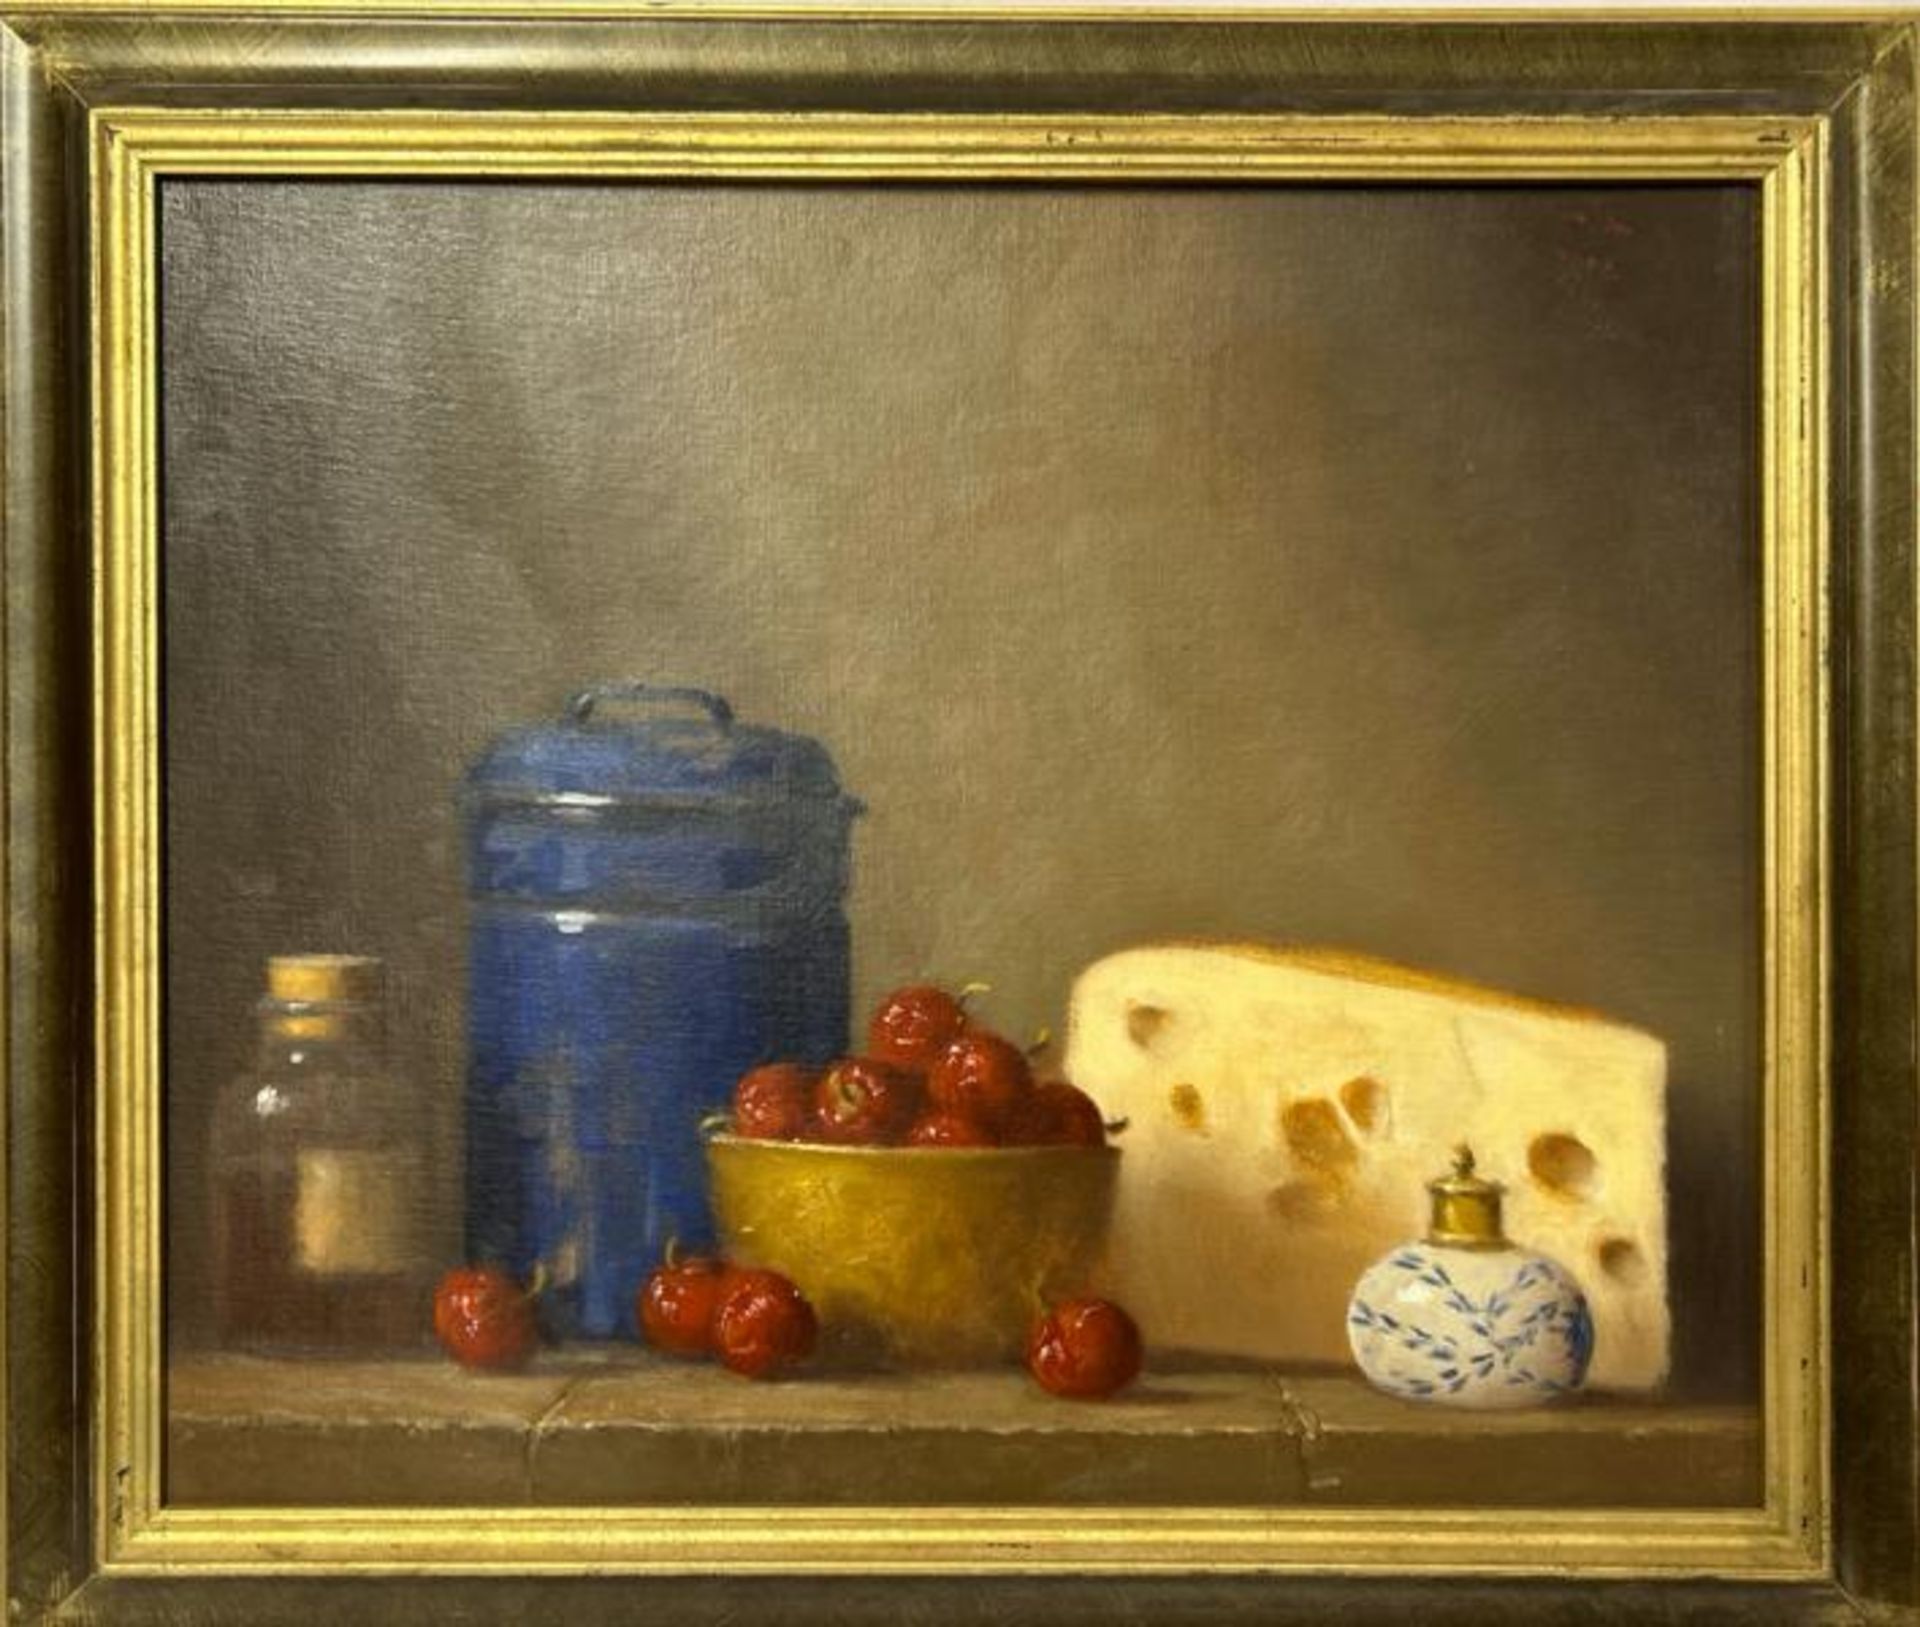 Still life oil on canvas, "Cheese & Cherry's" indistictly signed in red, top right corner, 58 x 48cm